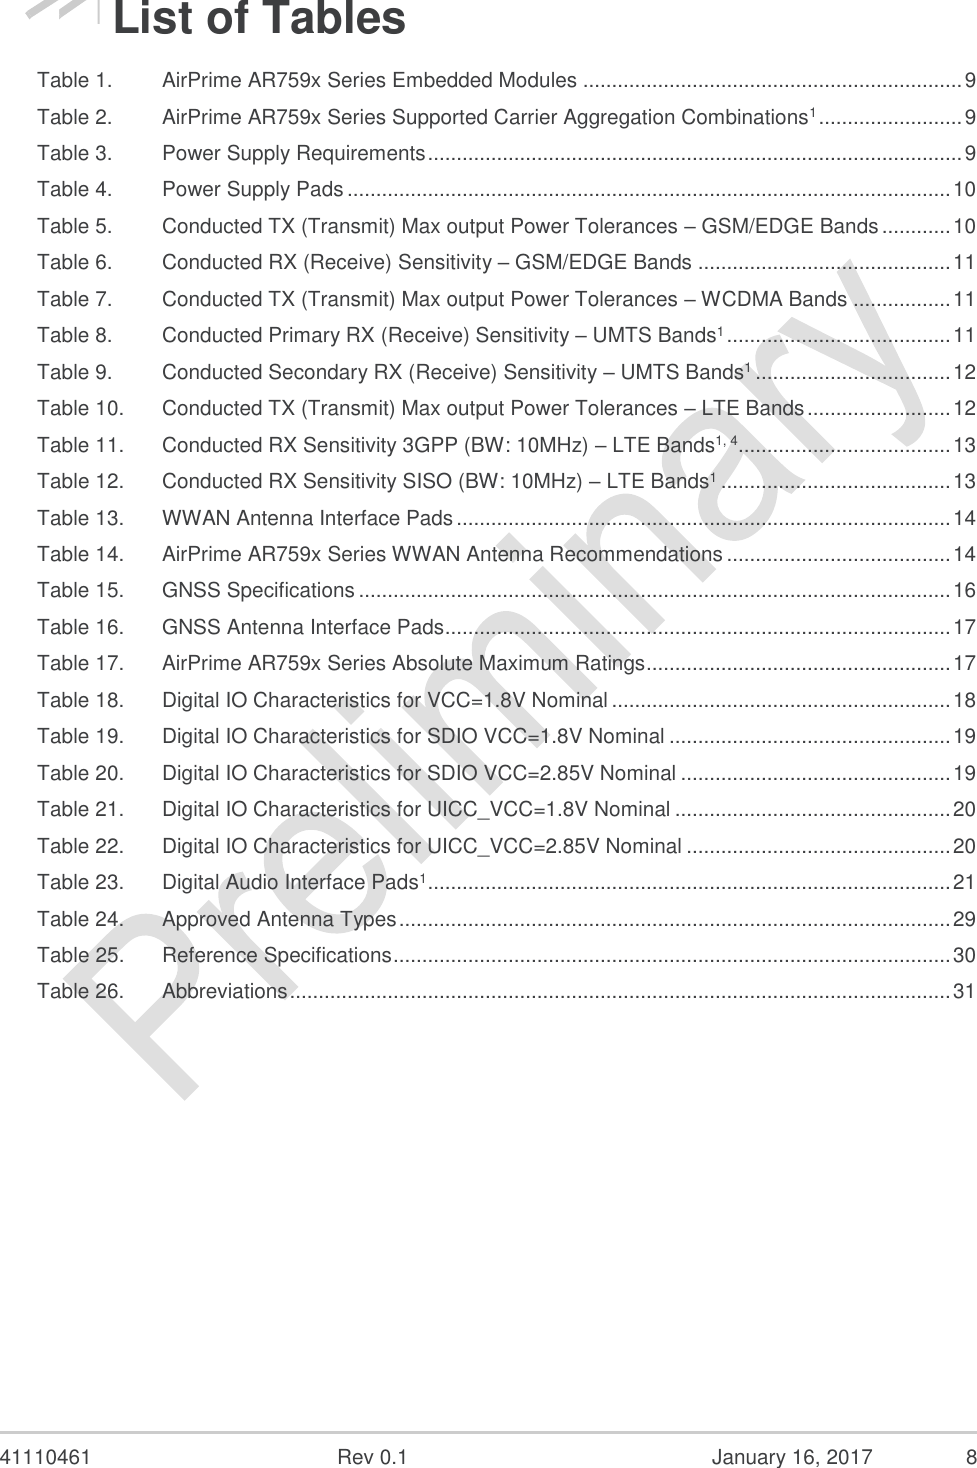  41110461  Rev 0.1  January 16, 2017  8 List of Tables Table 1. AirPrime AR759x Series Embedded Modules .................................................................. 9 Table 2. AirPrime AR759x Series Supported Carrier Aggregation Combinations1 ......................... 9 Table 3. Power Supply Requirements ............................................................................................. 9 Table 4. Power Supply Pads ......................................................................................................... 10 Table 5. Conducted TX (Transmit) Max output Power Tolerances – GSM/EDGE Bands ............ 10 Table 6. Conducted RX (Receive) Sensitivity – GSM/EDGE Bands ............................................ 11 Table 7. Conducted TX (Transmit) Max output Power Tolerances – WCDMA Bands ................. 11 Table 8. Conducted Primary RX (Receive) Sensitivity – UMTS Bands1 ....................................... 11 Table 9. Conducted Secondary RX (Receive) Sensitivity – UMTS Bands1 .................................. 12 Table 10. Conducted TX (Transmit) Max output Power Tolerances – LTE Bands ......................... 12 Table 11. Conducted RX Sensitivity 3GPP (BW: 10MHz) – LTE Bands1, 4..................................... 13 Table 12. Conducted RX Sensitivity SISO (BW: 10MHz) – LTE Bands1 ........................................ 13 Table 13. WWAN Antenna Interface Pads ...................................................................................... 14 Table 14. AirPrime AR759x Series WWAN Antenna Recommendations ....................................... 14 Table 15. GNSS Specifications ....................................................................................................... 16 Table 16. GNSS Antenna Interface Pads ........................................................................................ 17 Table 17. AirPrime AR759x Series Absolute Maximum Ratings..................................................... 17 Table 18. Digital IO Characteristics for VCC=1.8V Nominal ........................................................... 18 Table 19. Digital IO Characteristics for SDIO VCC=1.8V Nominal ................................................. 19 Table 20. Digital IO Characteristics for SDIO VCC=2.85V Nominal ............................................... 19 Table 21. Digital IO Characteristics for UICC_VCC=1.8V Nominal ................................................ 20 Table 22. Digital IO Characteristics for UICC_VCC=2.85V Nominal .............................................. 20 Table 23. Digital Audio Interface Pads1 ........................................................................................... 21 Table 24. Approved Antenna Types ................................................................................................ 29 Table 25. Reference Specifications ................................................................................................. 30 Table 26. Abbreviations ................................................................................................................... 31  